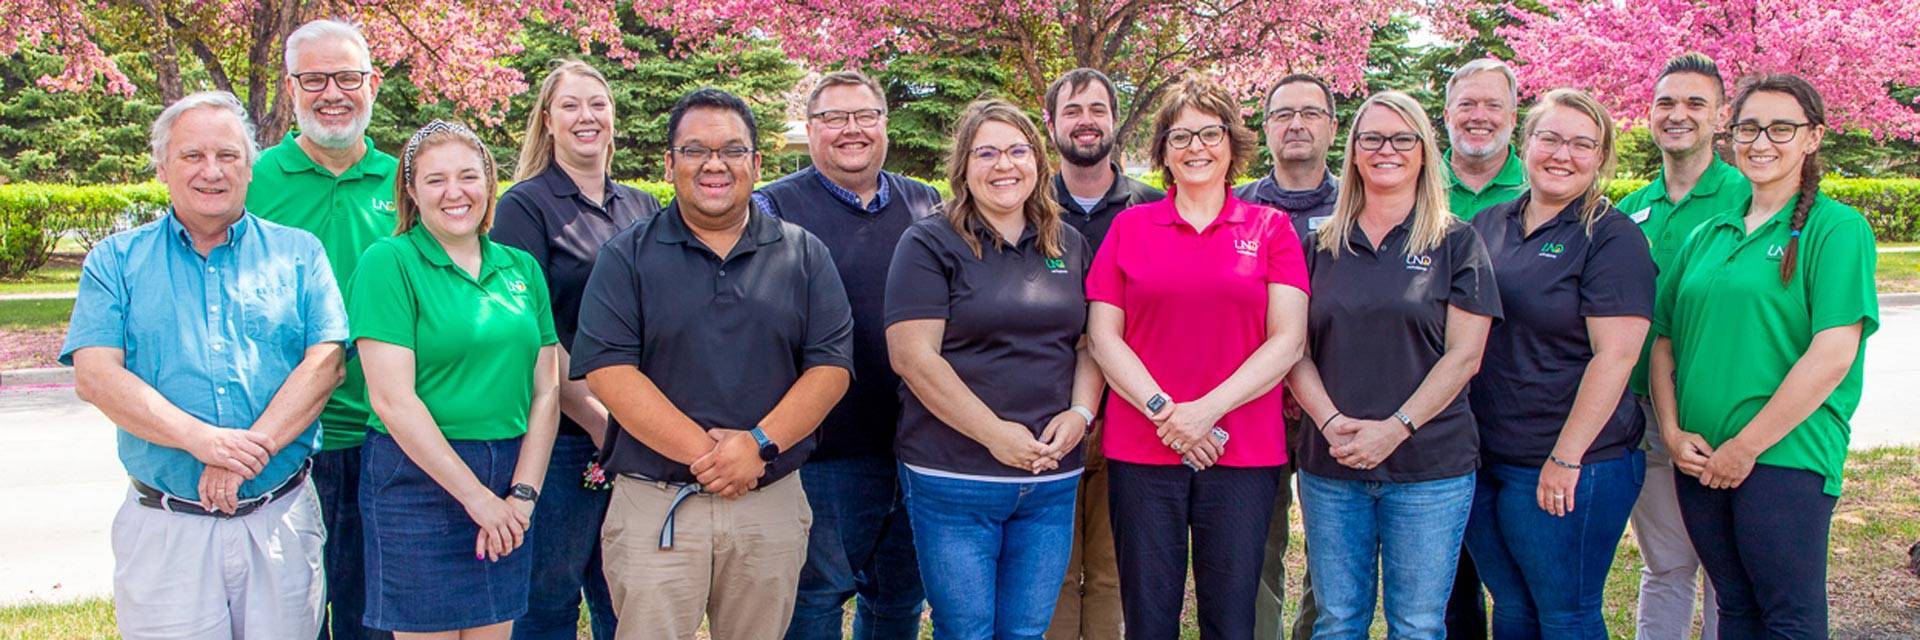 the housing and residence life staff in front of spring trees